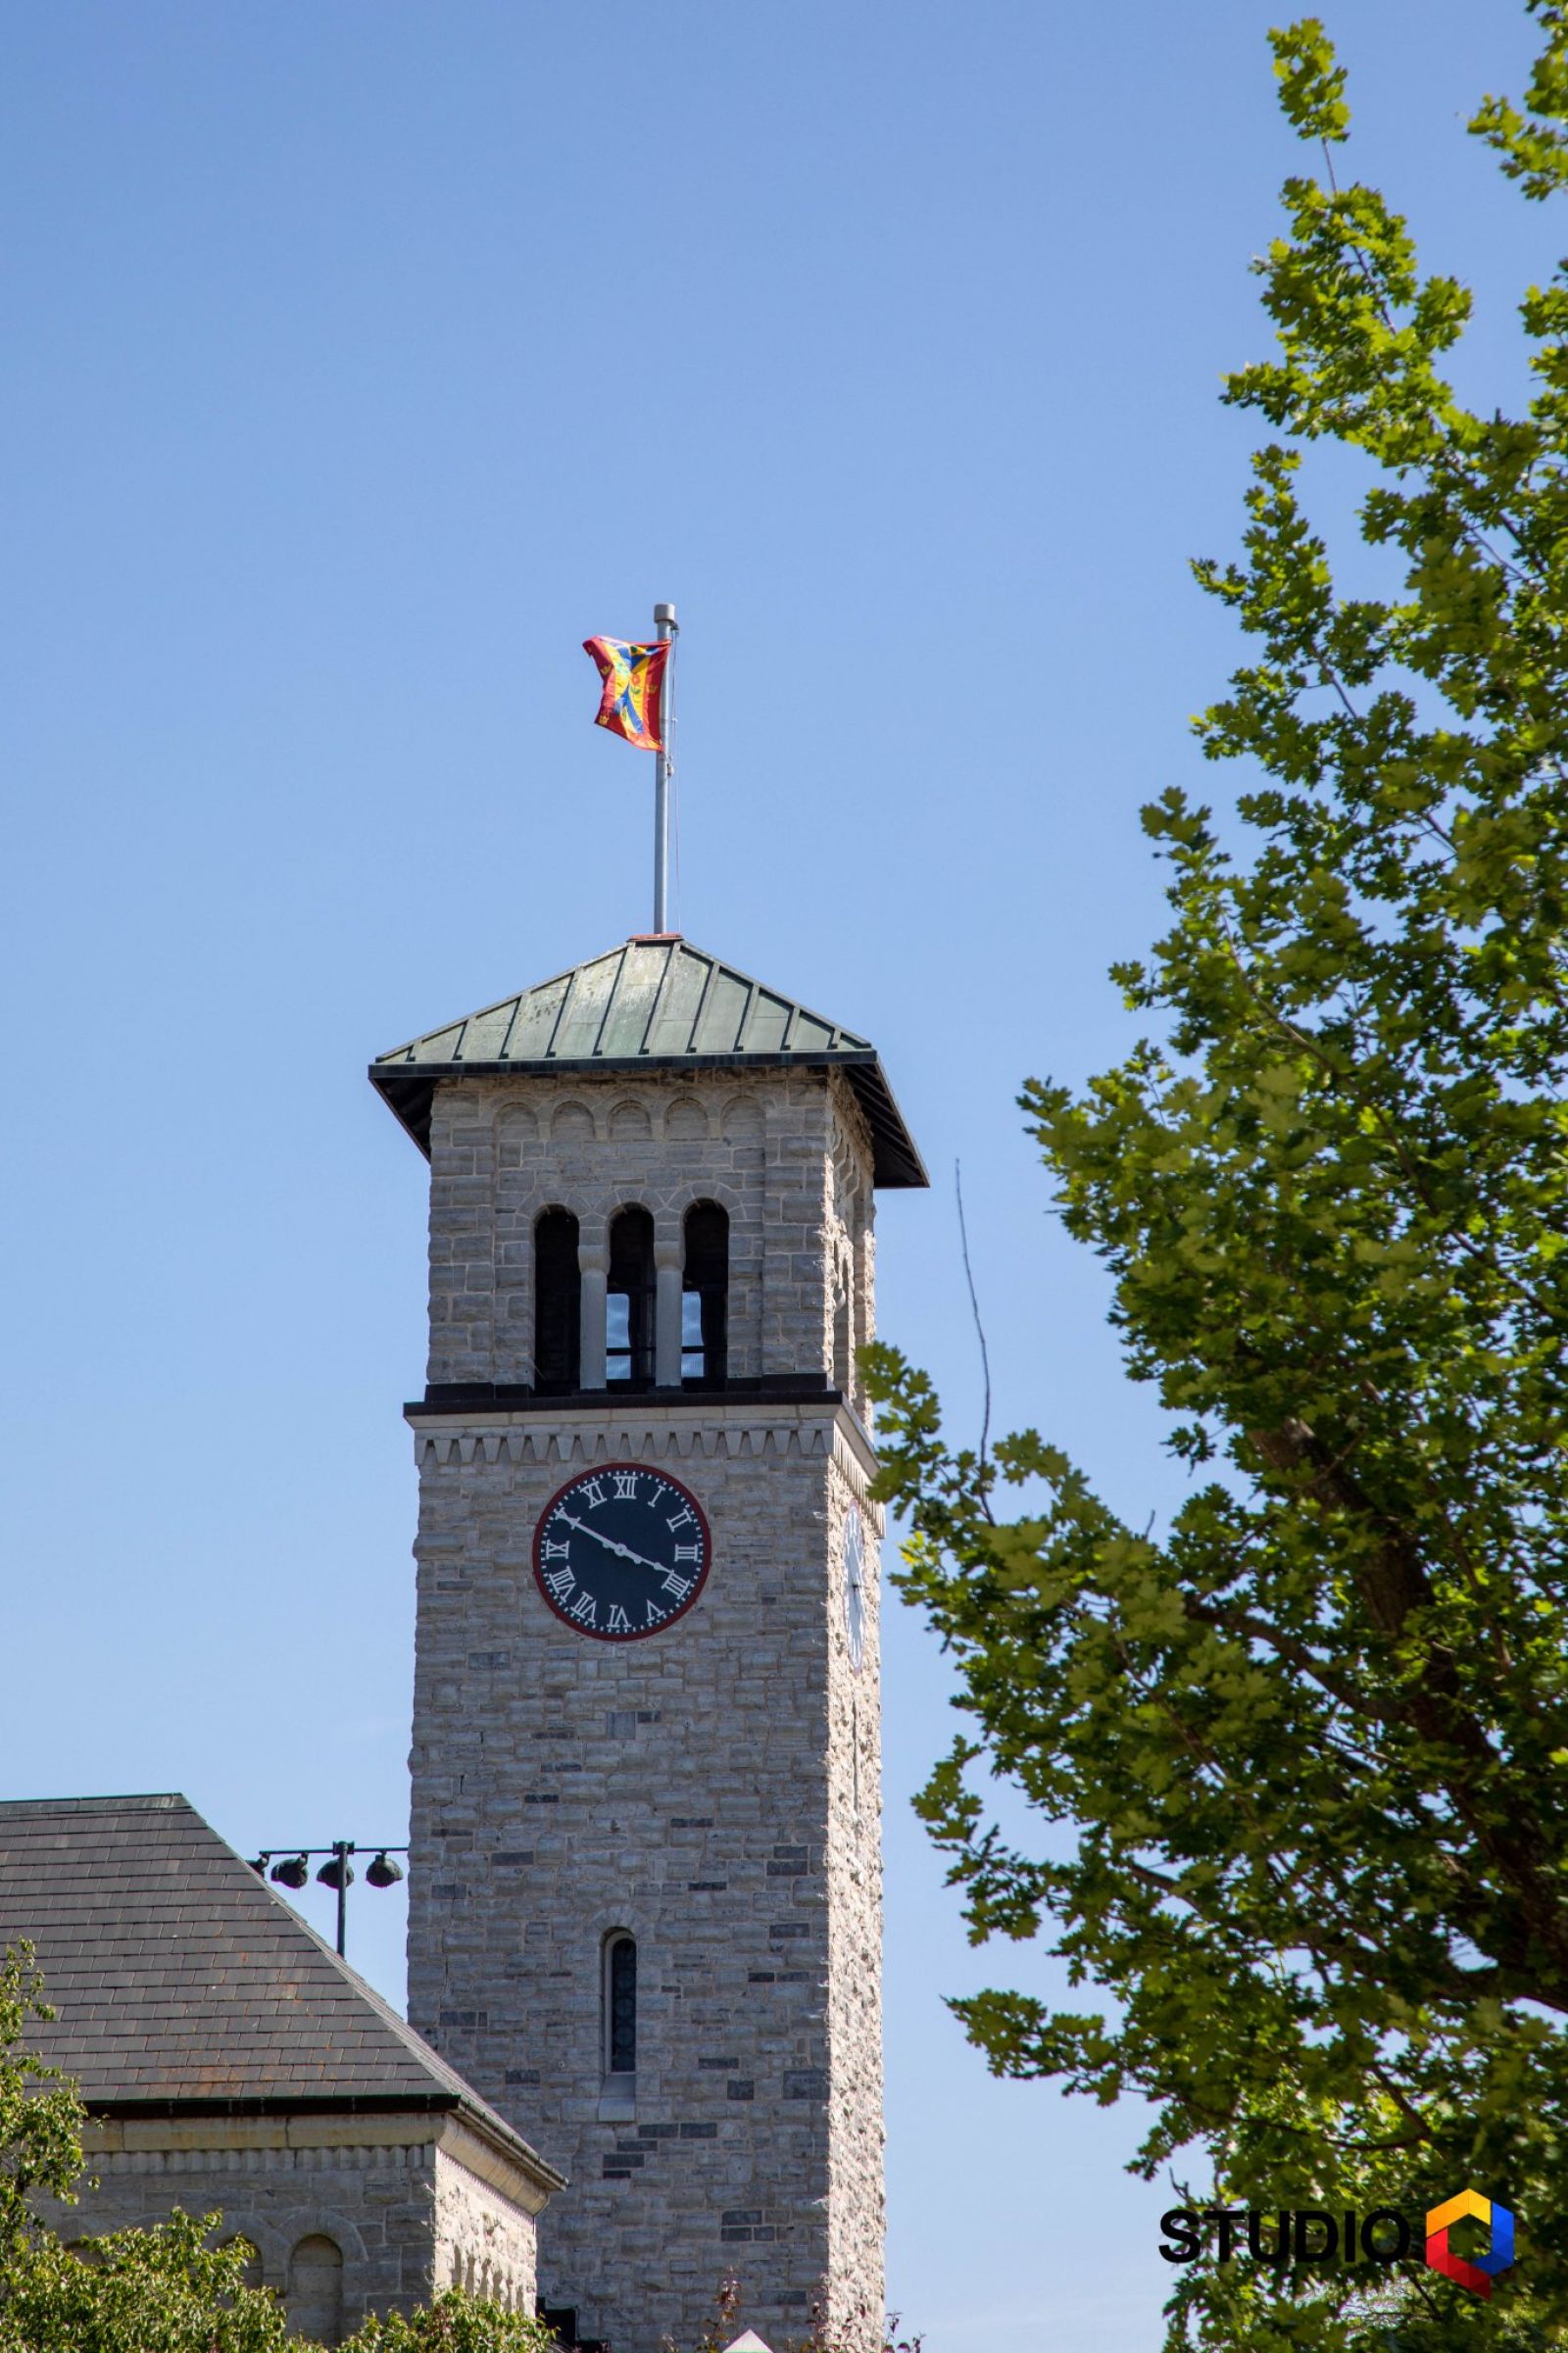 Grant Hall Tower